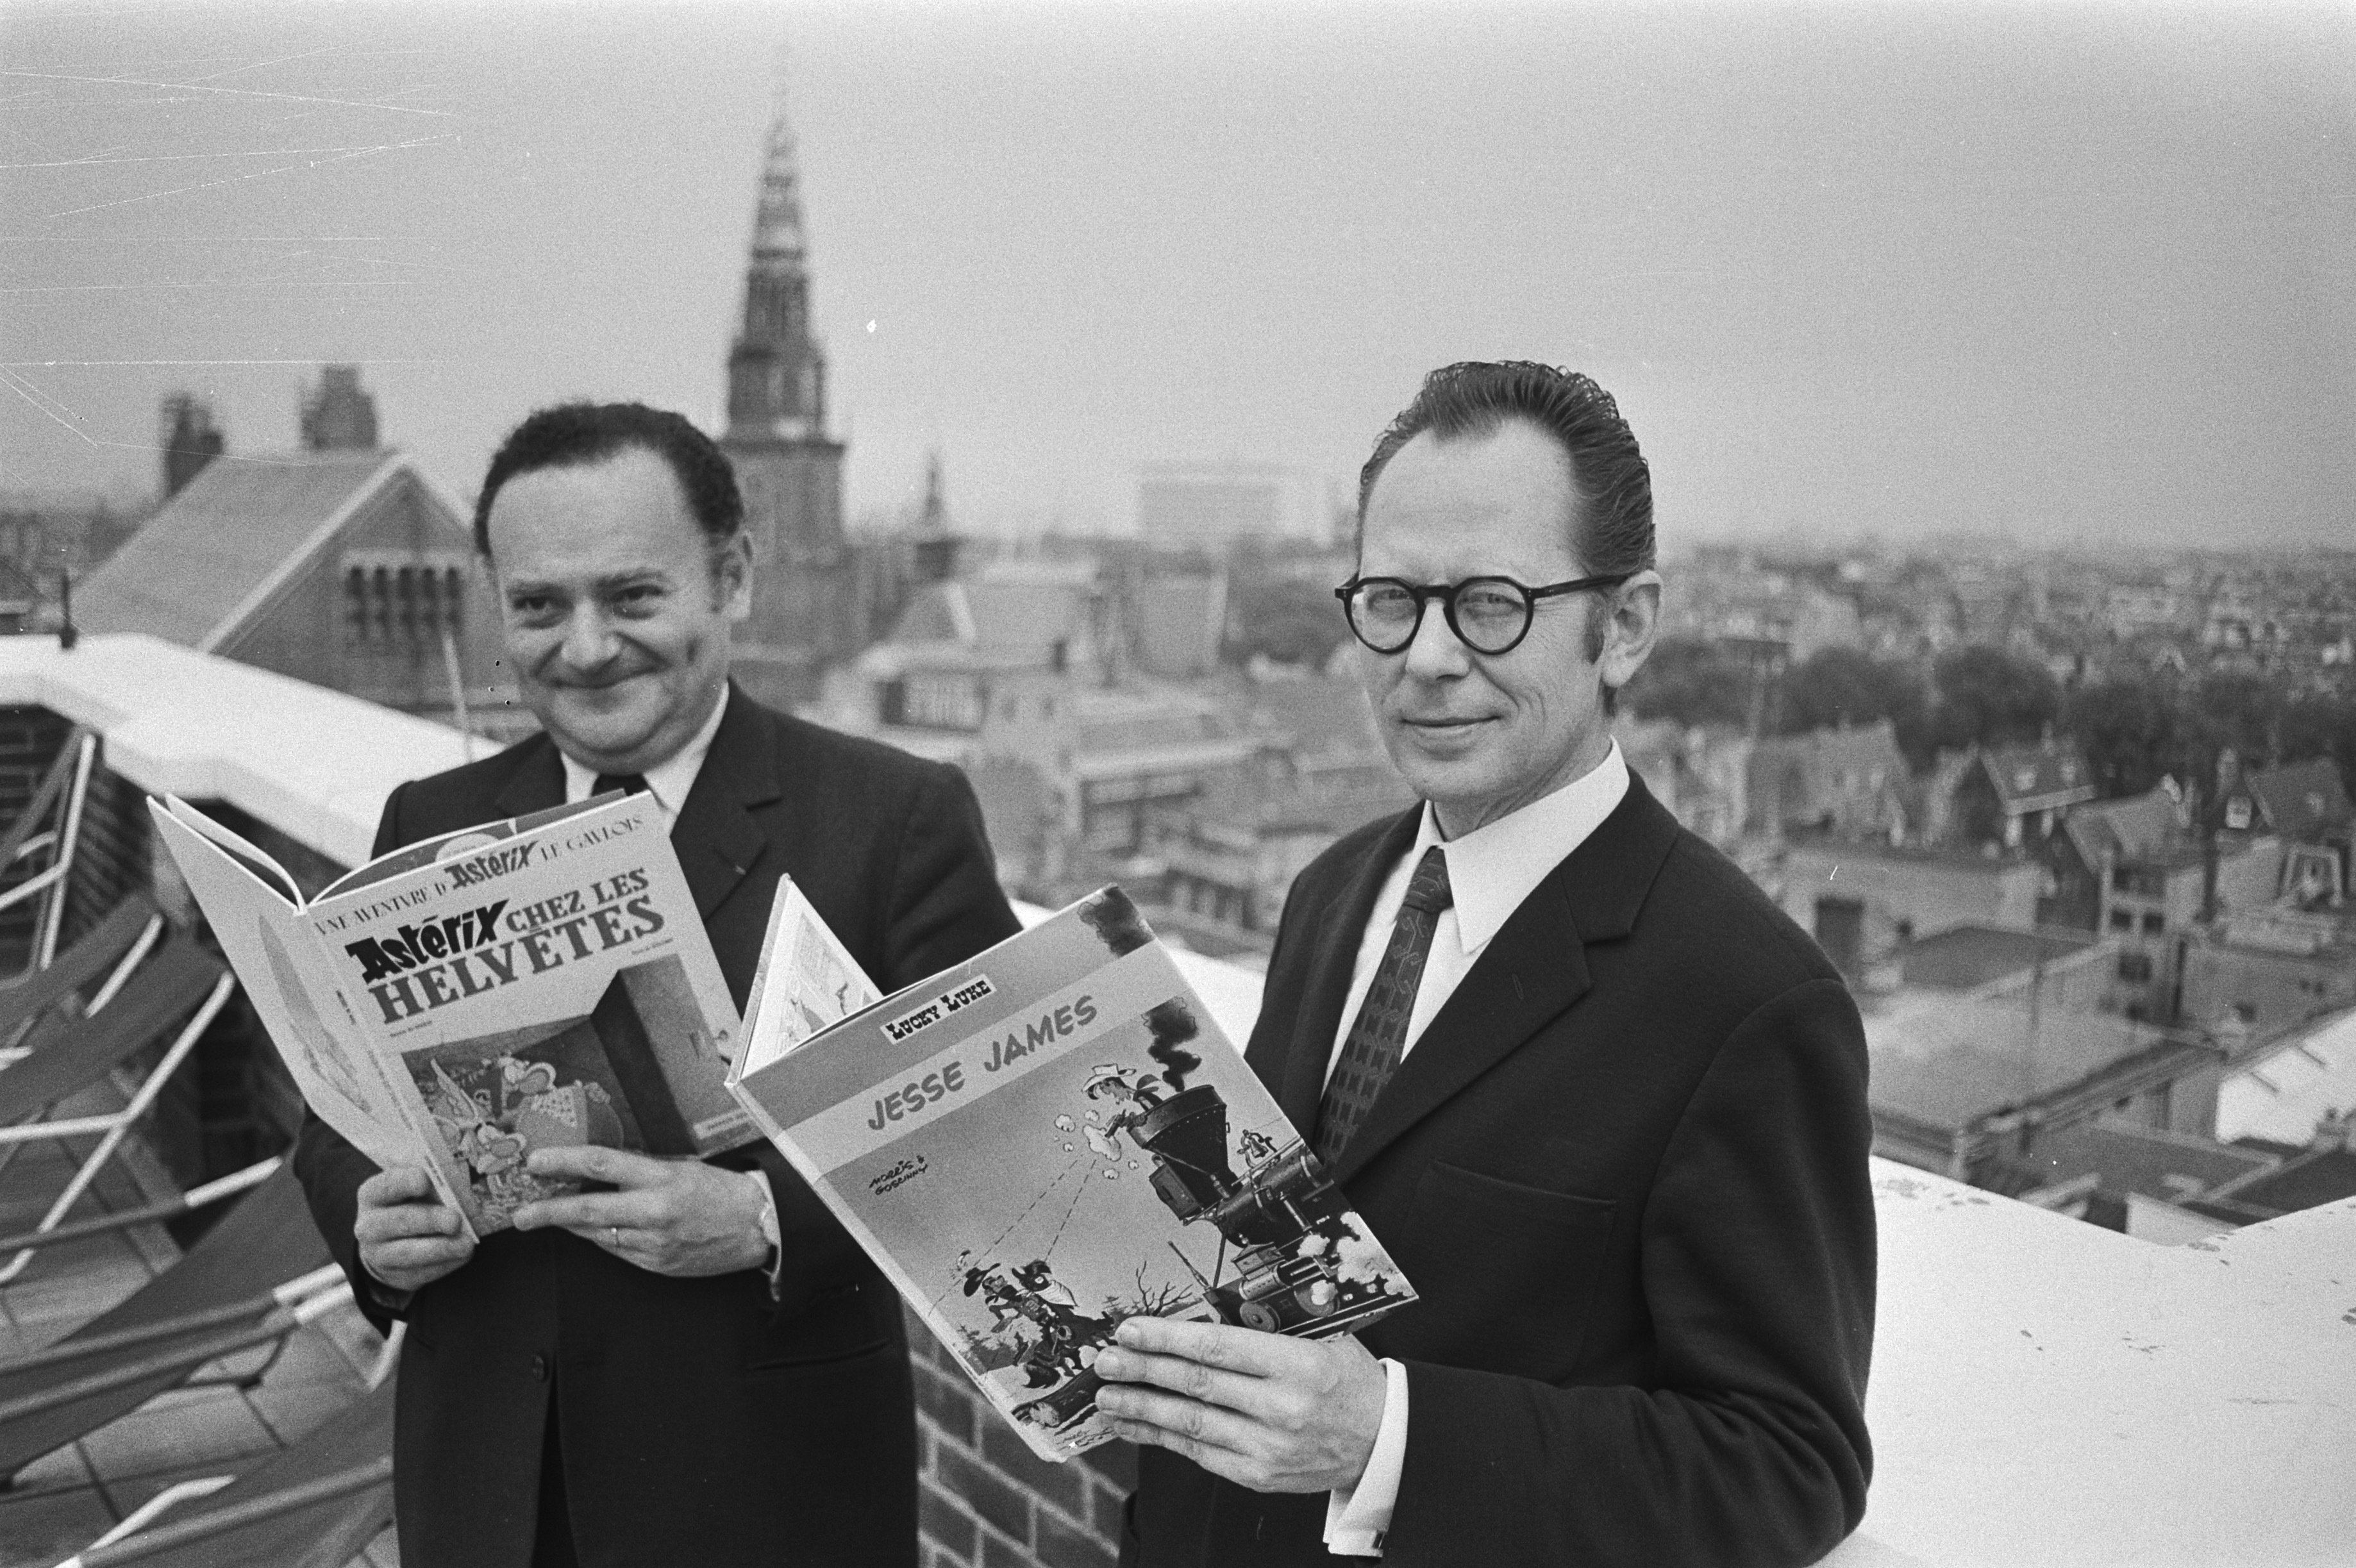 BD Authors René Goscinny (L) and Morris (R) in 1971, holding Asterix and Lucky Luke albums respectively (Source: Wikimedia Commons)